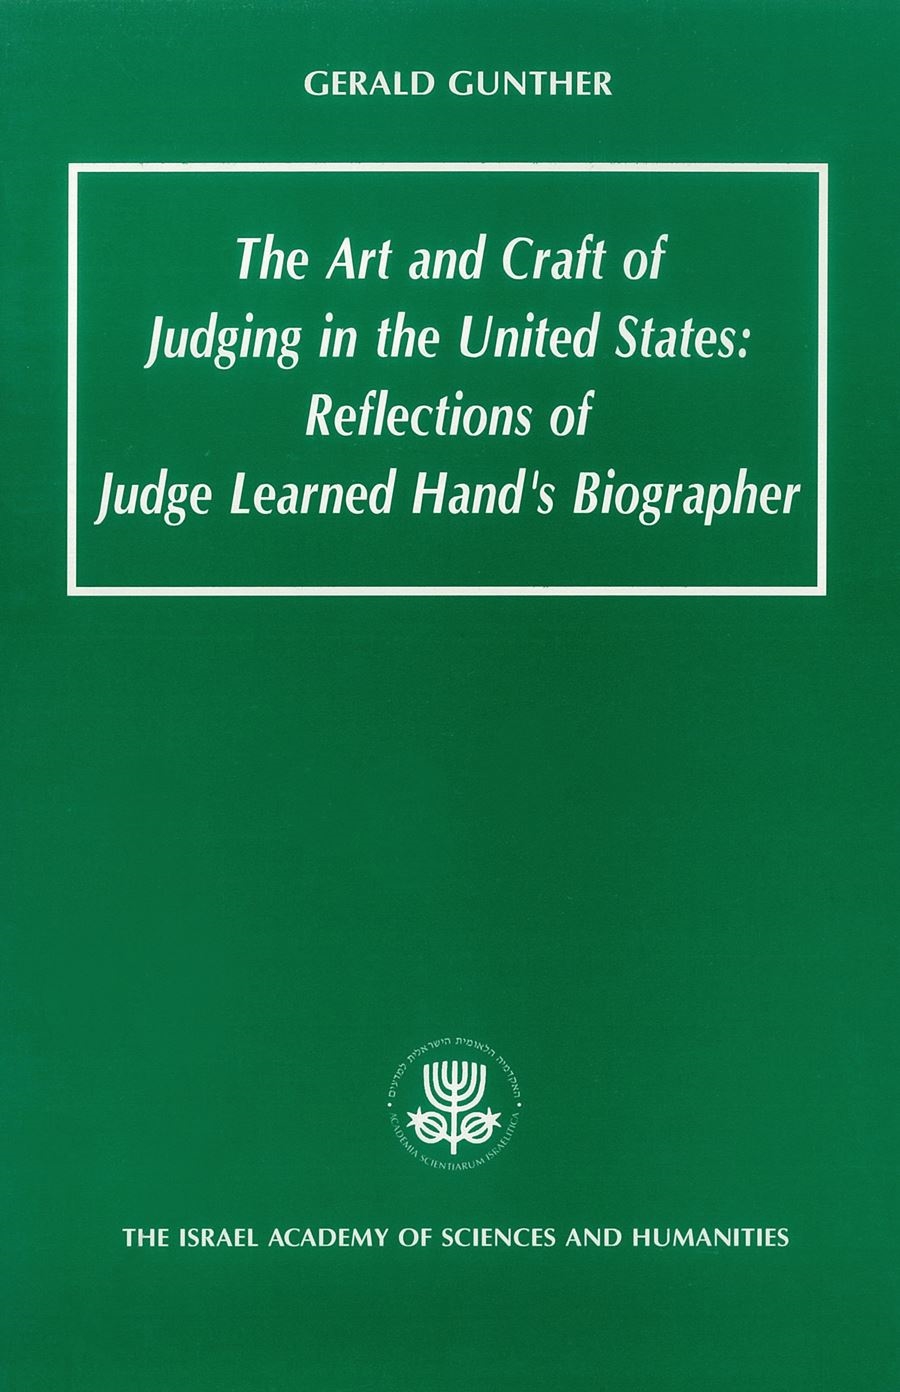 The Art and Craft of Judging in the United States: Reflections of Judge Learned Hand's Biographer